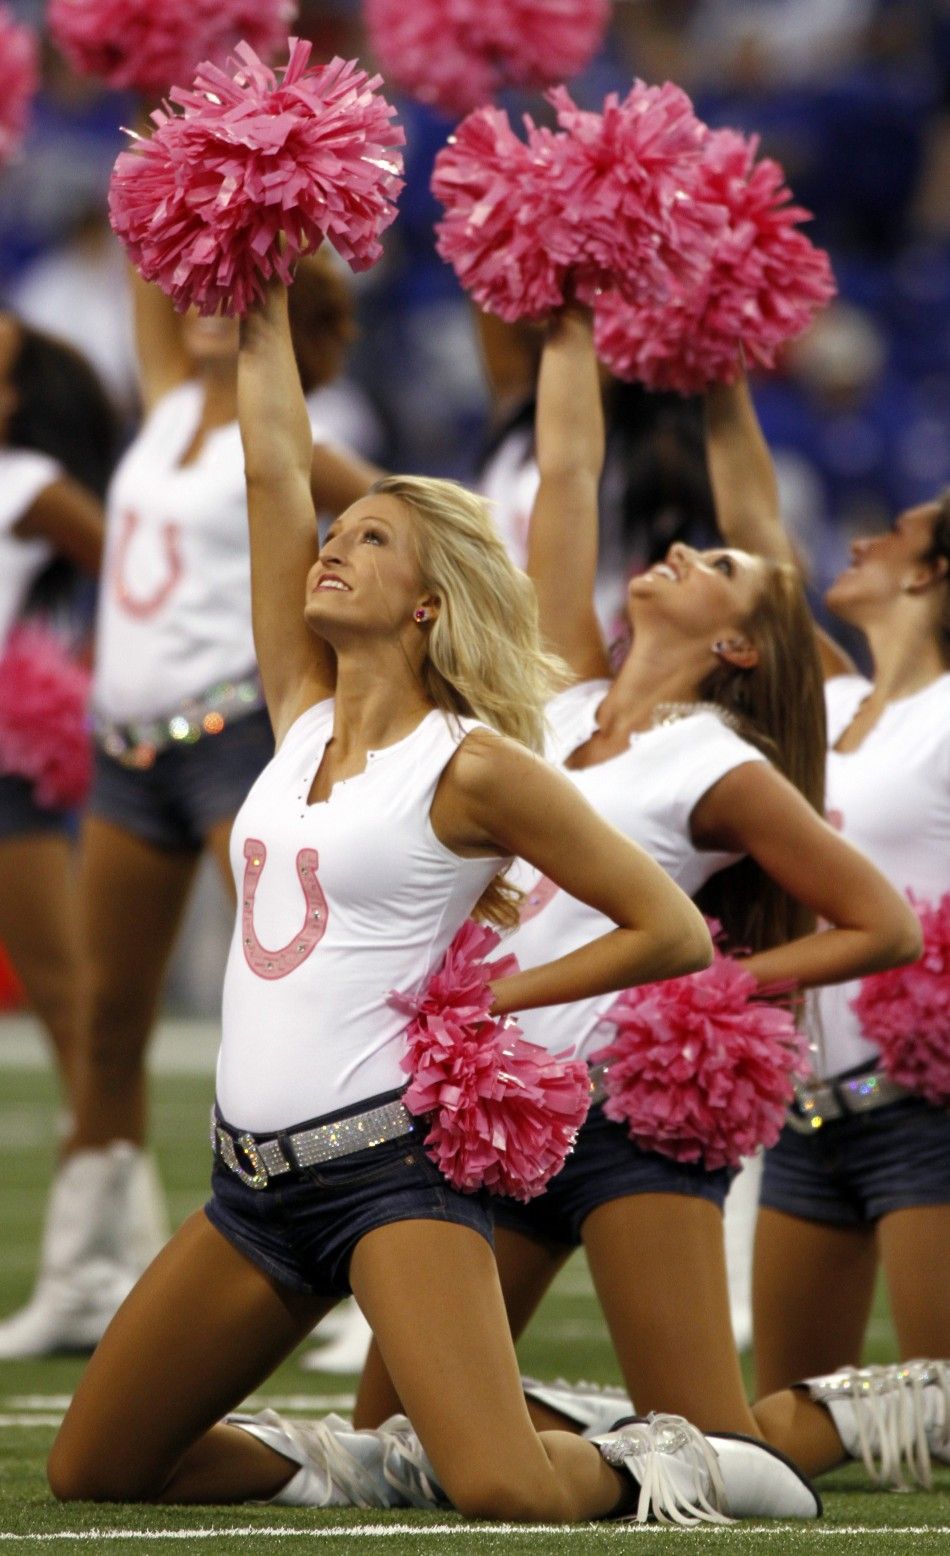 The Indianapolis Colts cheerleaders 